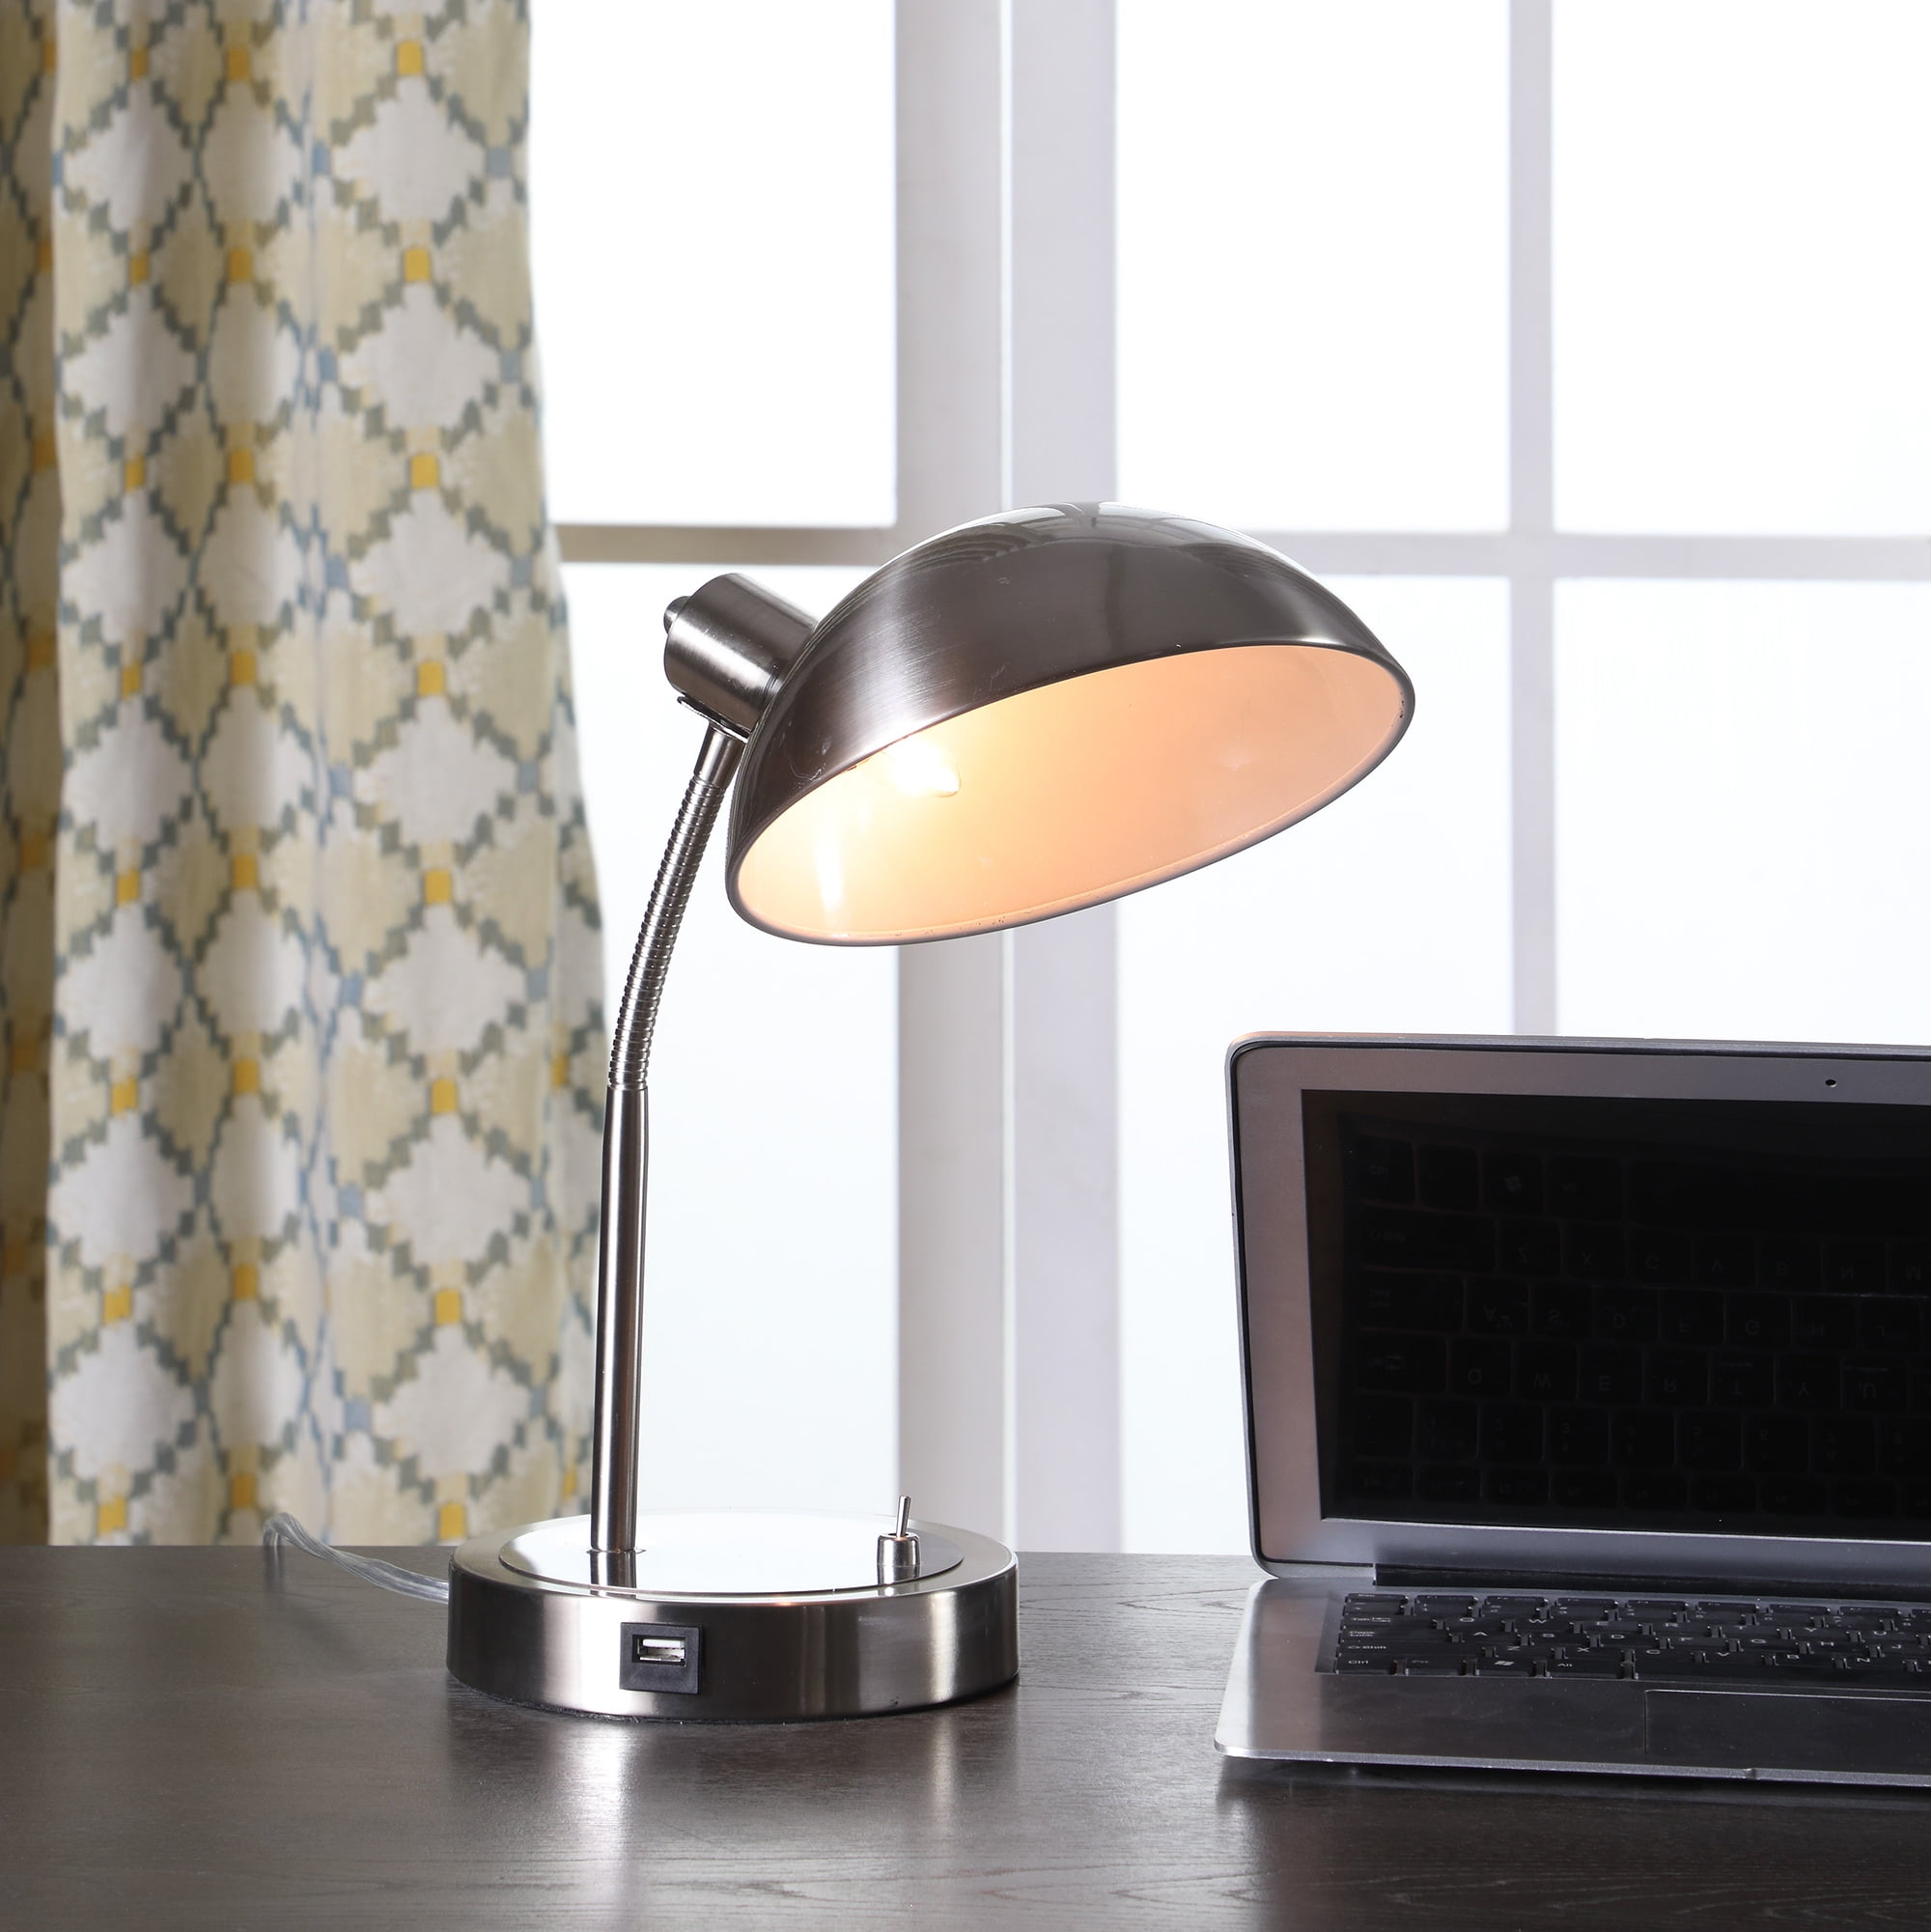 O’Bright Dimmable LED Desk Lamp with USB Charging Port Full Range 5V/2A 